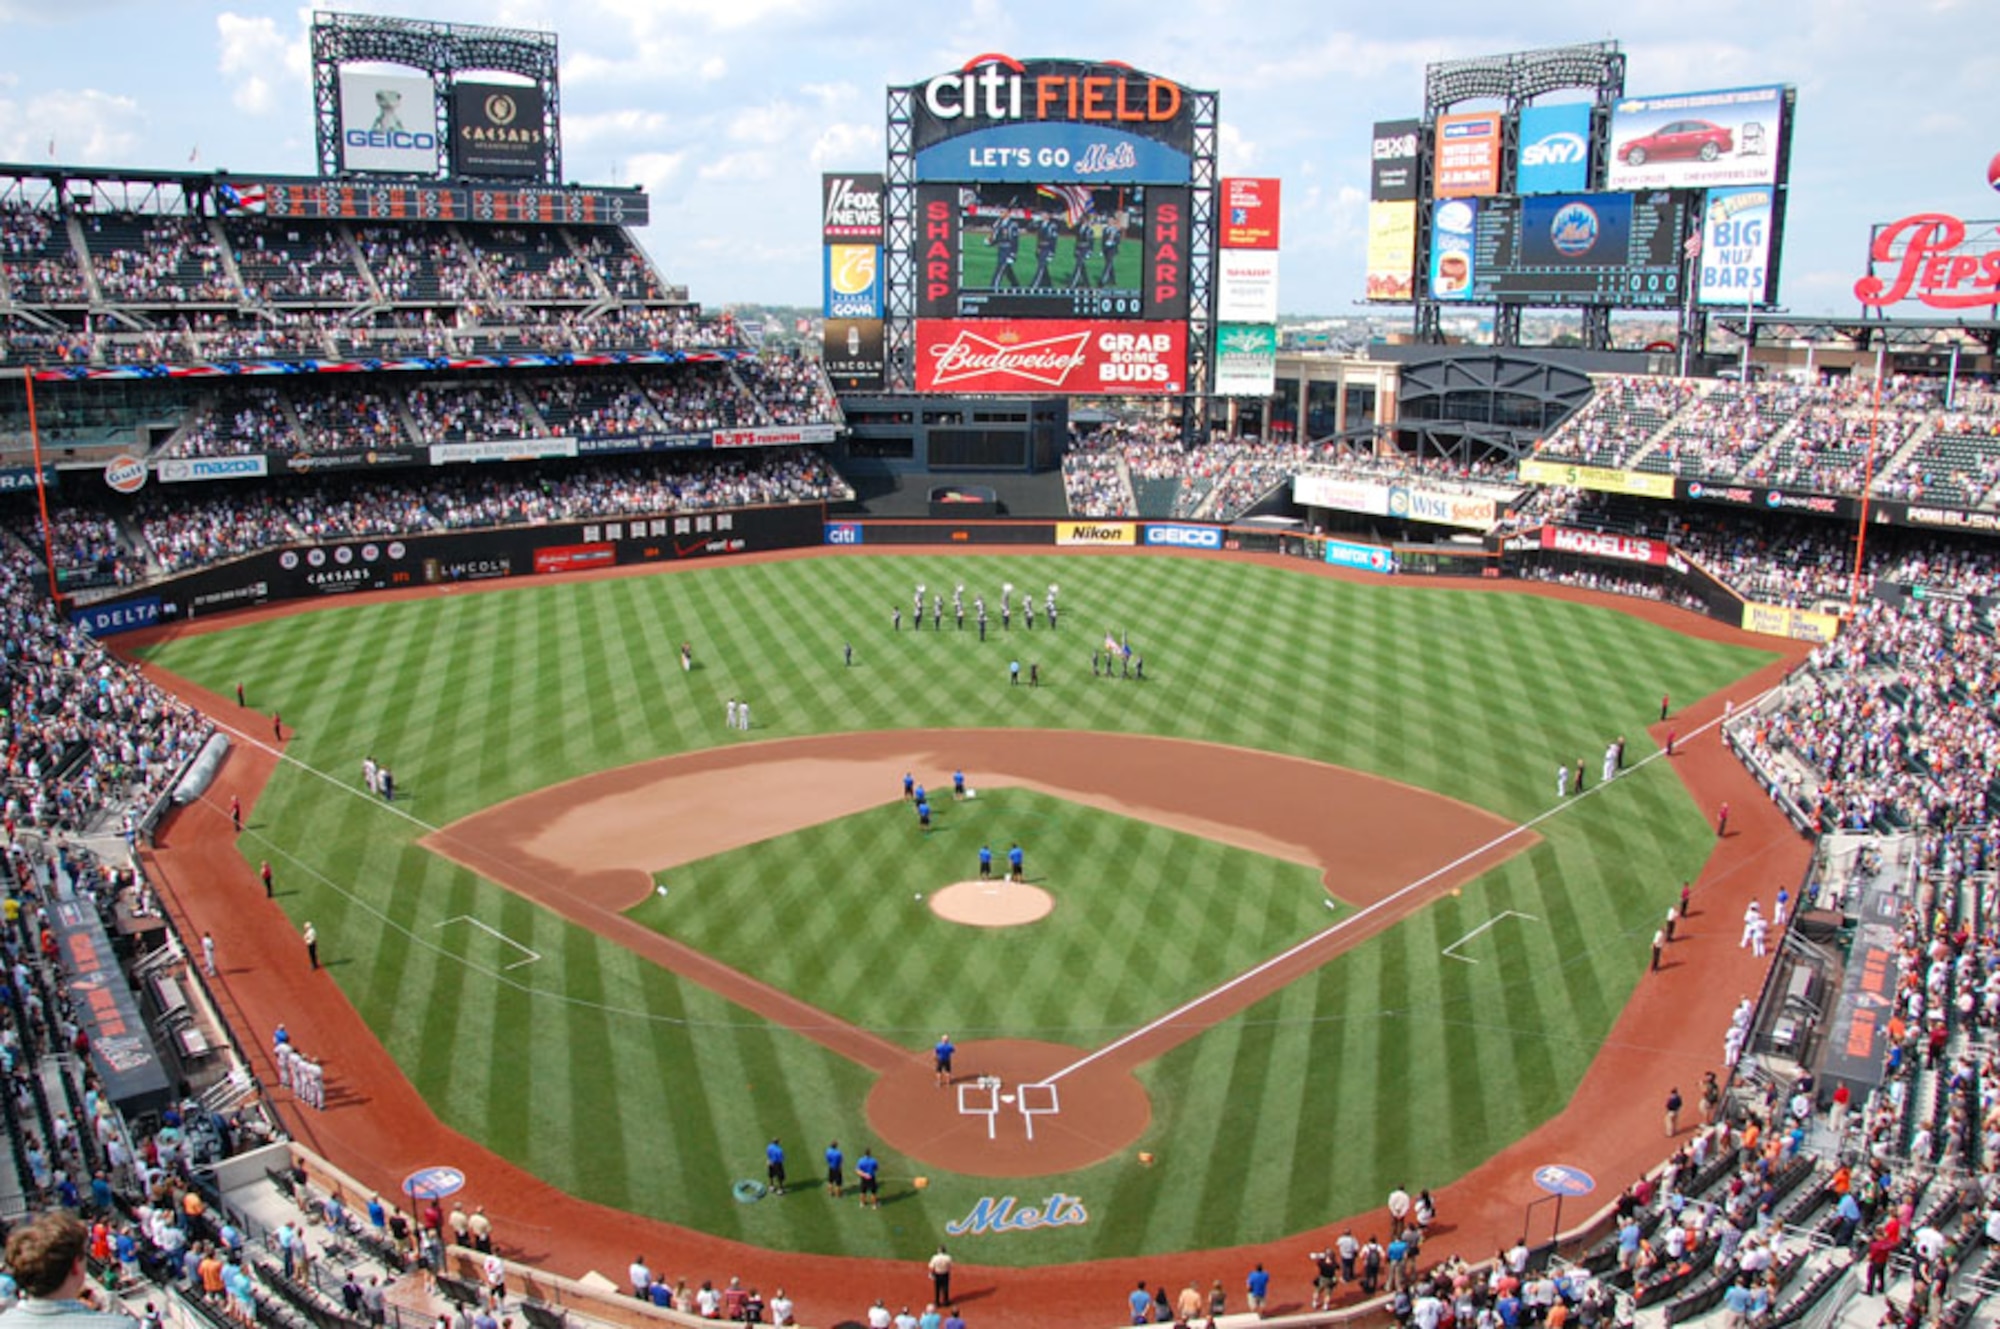 The U.S. Air Force Ceremonial Brass band performs the National Anthem July 2 at Citi Field for the New York Mets vs. New York Yankees baseball game. The USAF Band also played on NBC's Today Show for Independence Day. (U.S. Air Force photo by Capt. Bryan Bouchard)